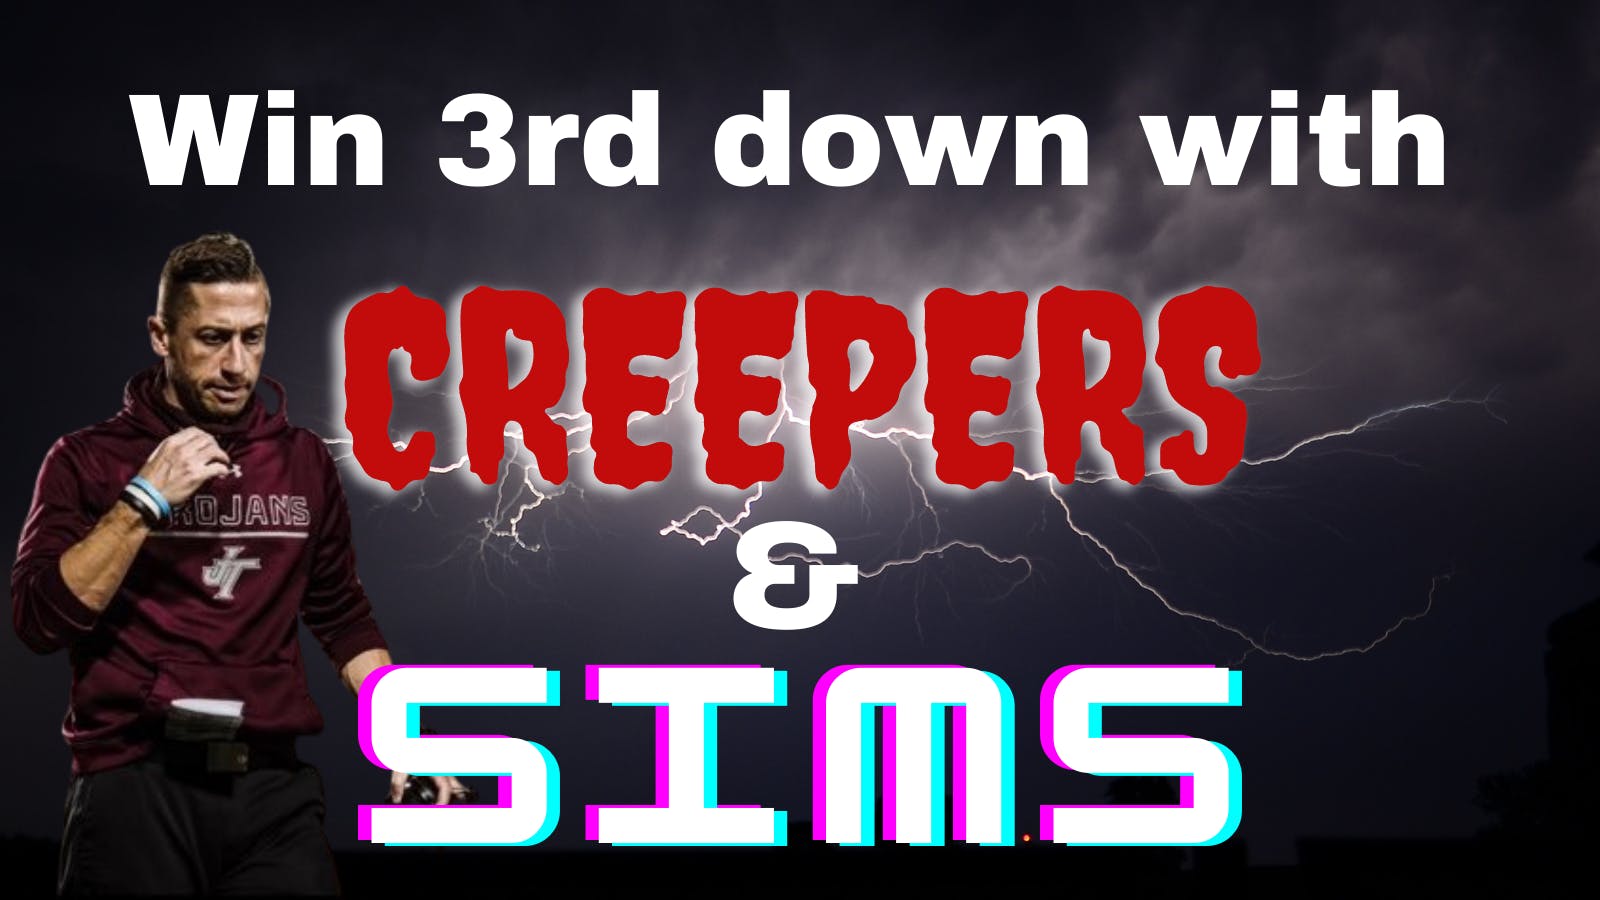 Want your defense to get off the field after third down? Sims and Creepers are the answer!